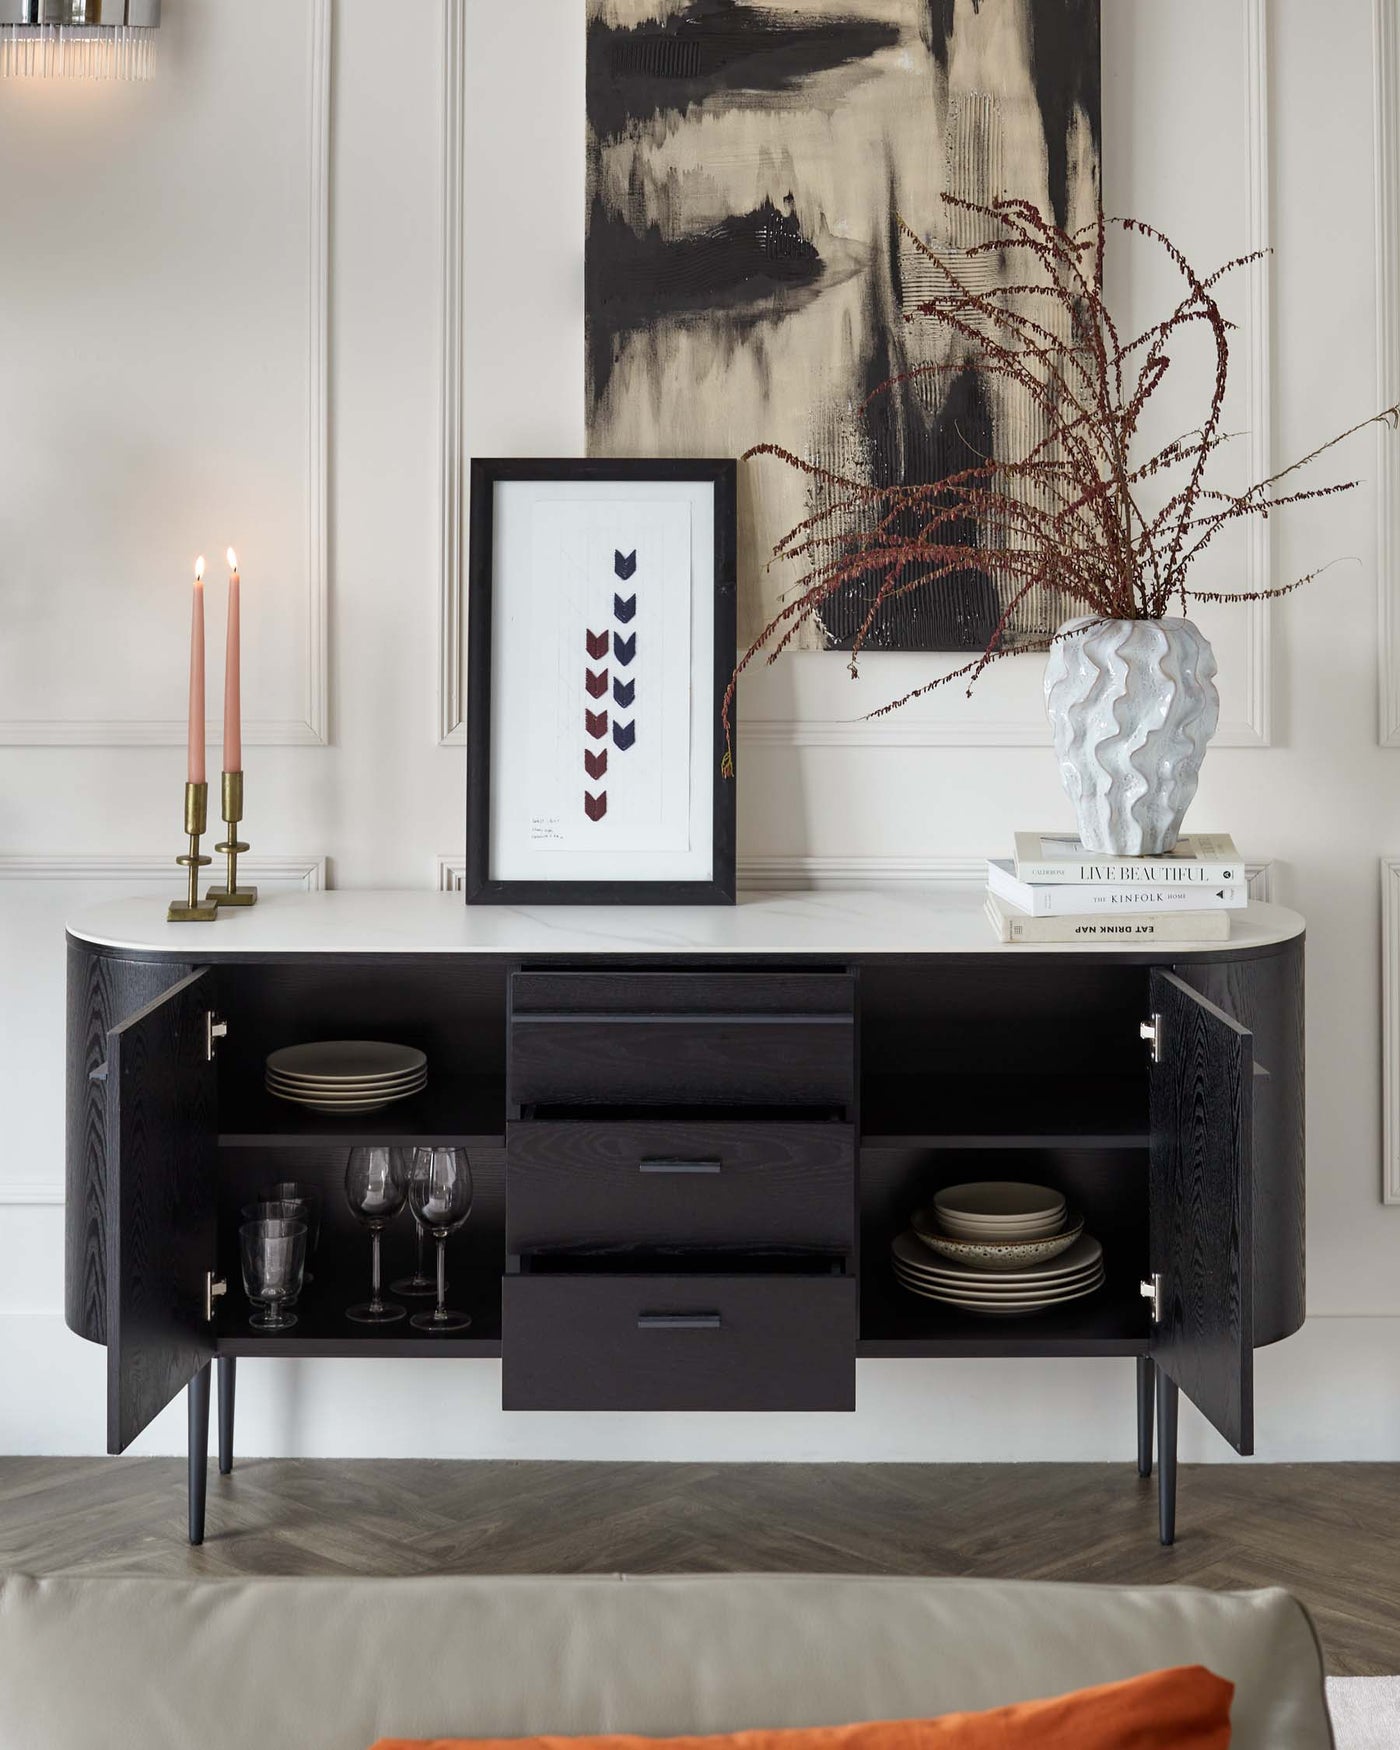 Elegant contemporary sideboard in a dark finish with textured front panels. Features include two doors revealing shelved storage spaces, three central drawers for additional storage, and stylish tapered metal legs. Accessories and tableware on display are not included.